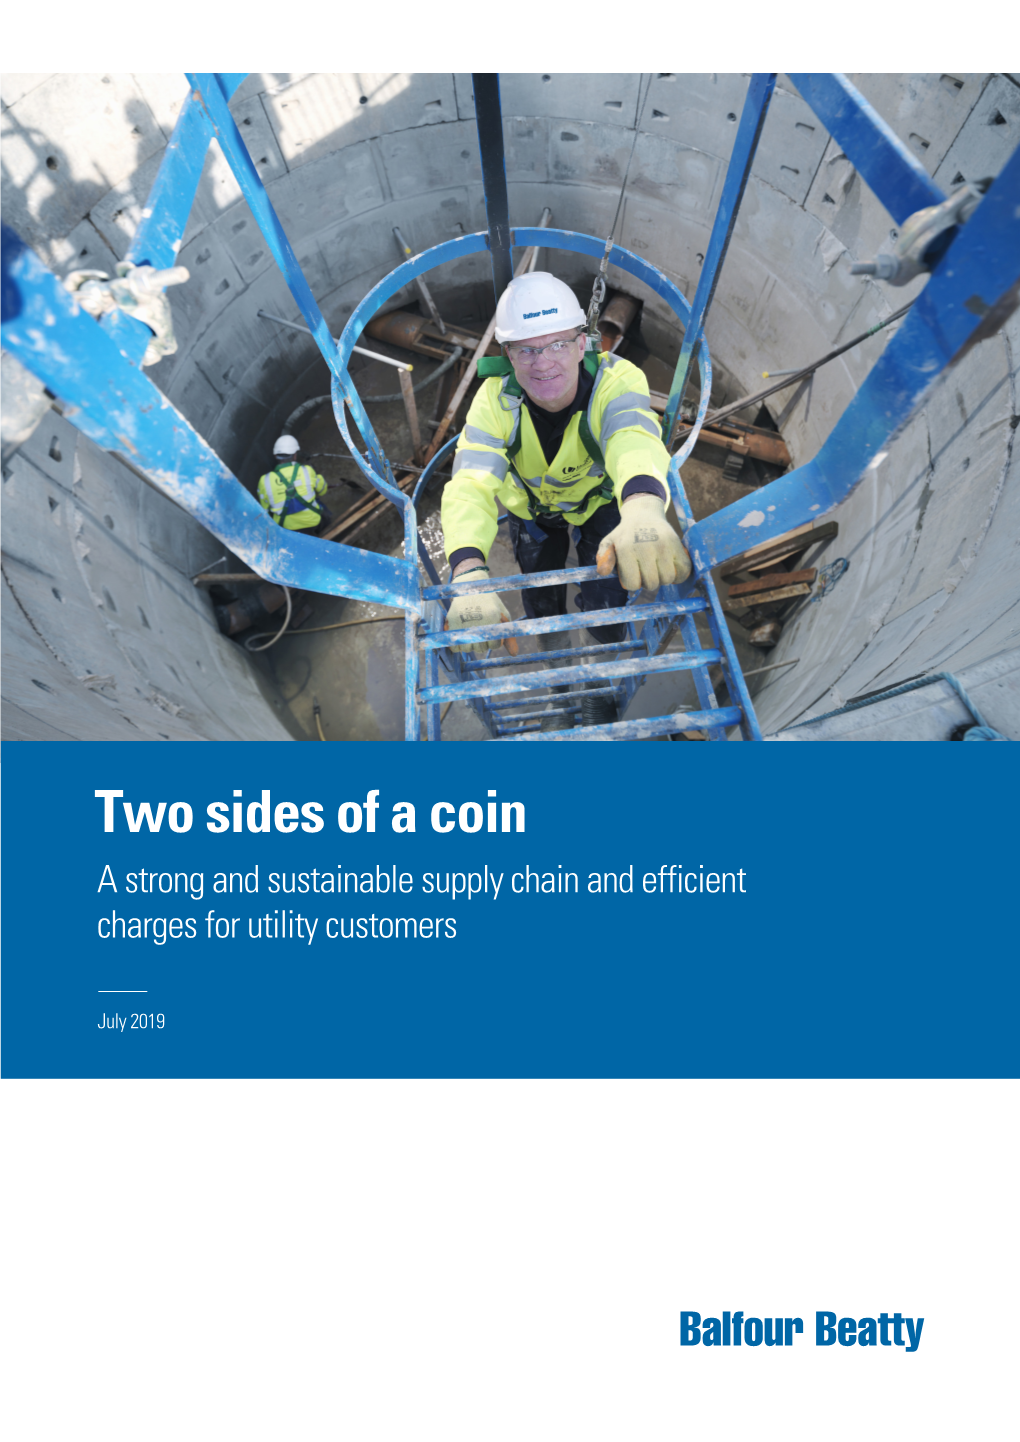 Two Sides of a Coin a Strong and Sustainable Supply Chain and Efficient Charges for Utility Customers